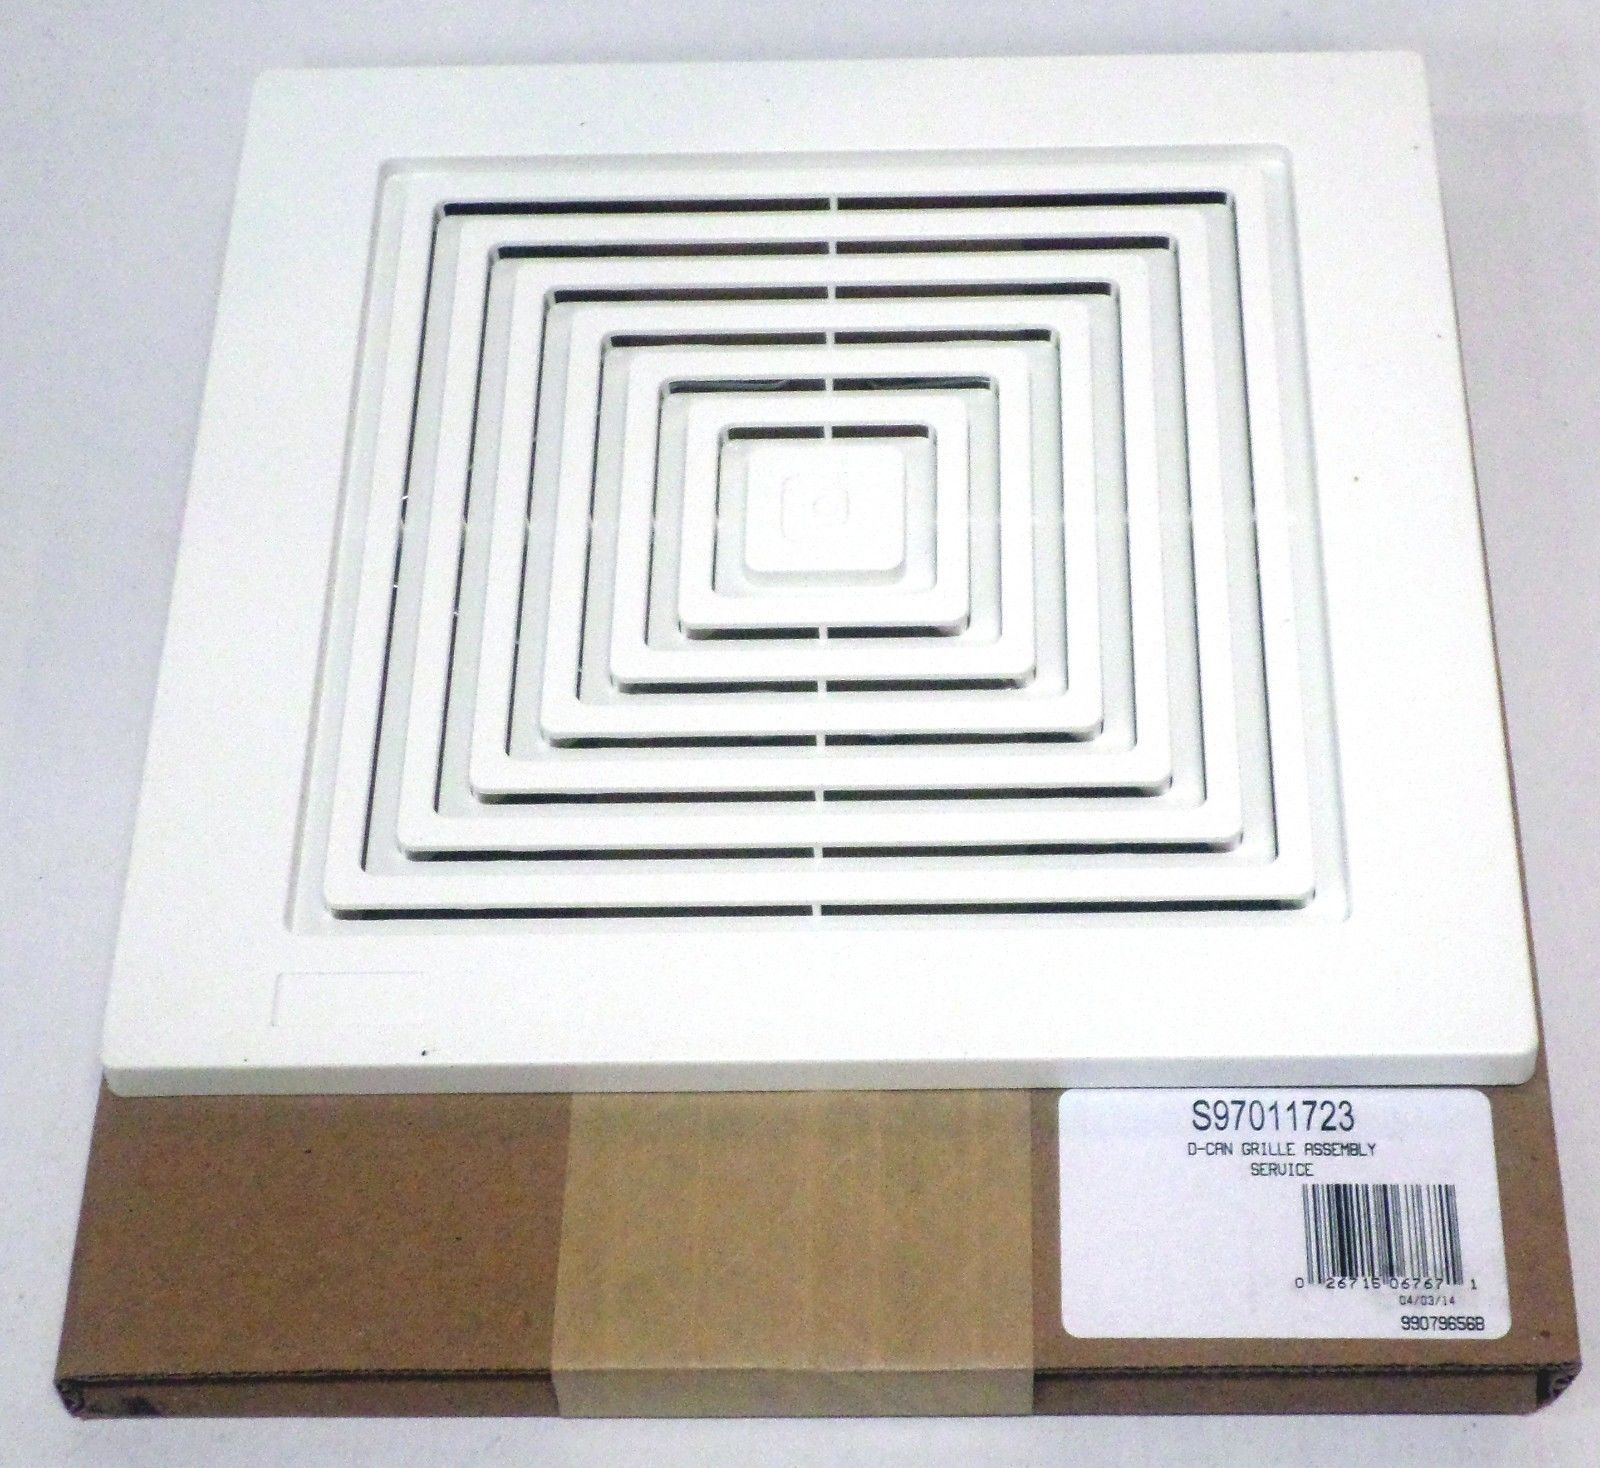 Details About Broan Nutone 97011723 Bath Bathroom Ceiling Fan Grille Grill Cover Plastic White regarding size 1600 X 1468